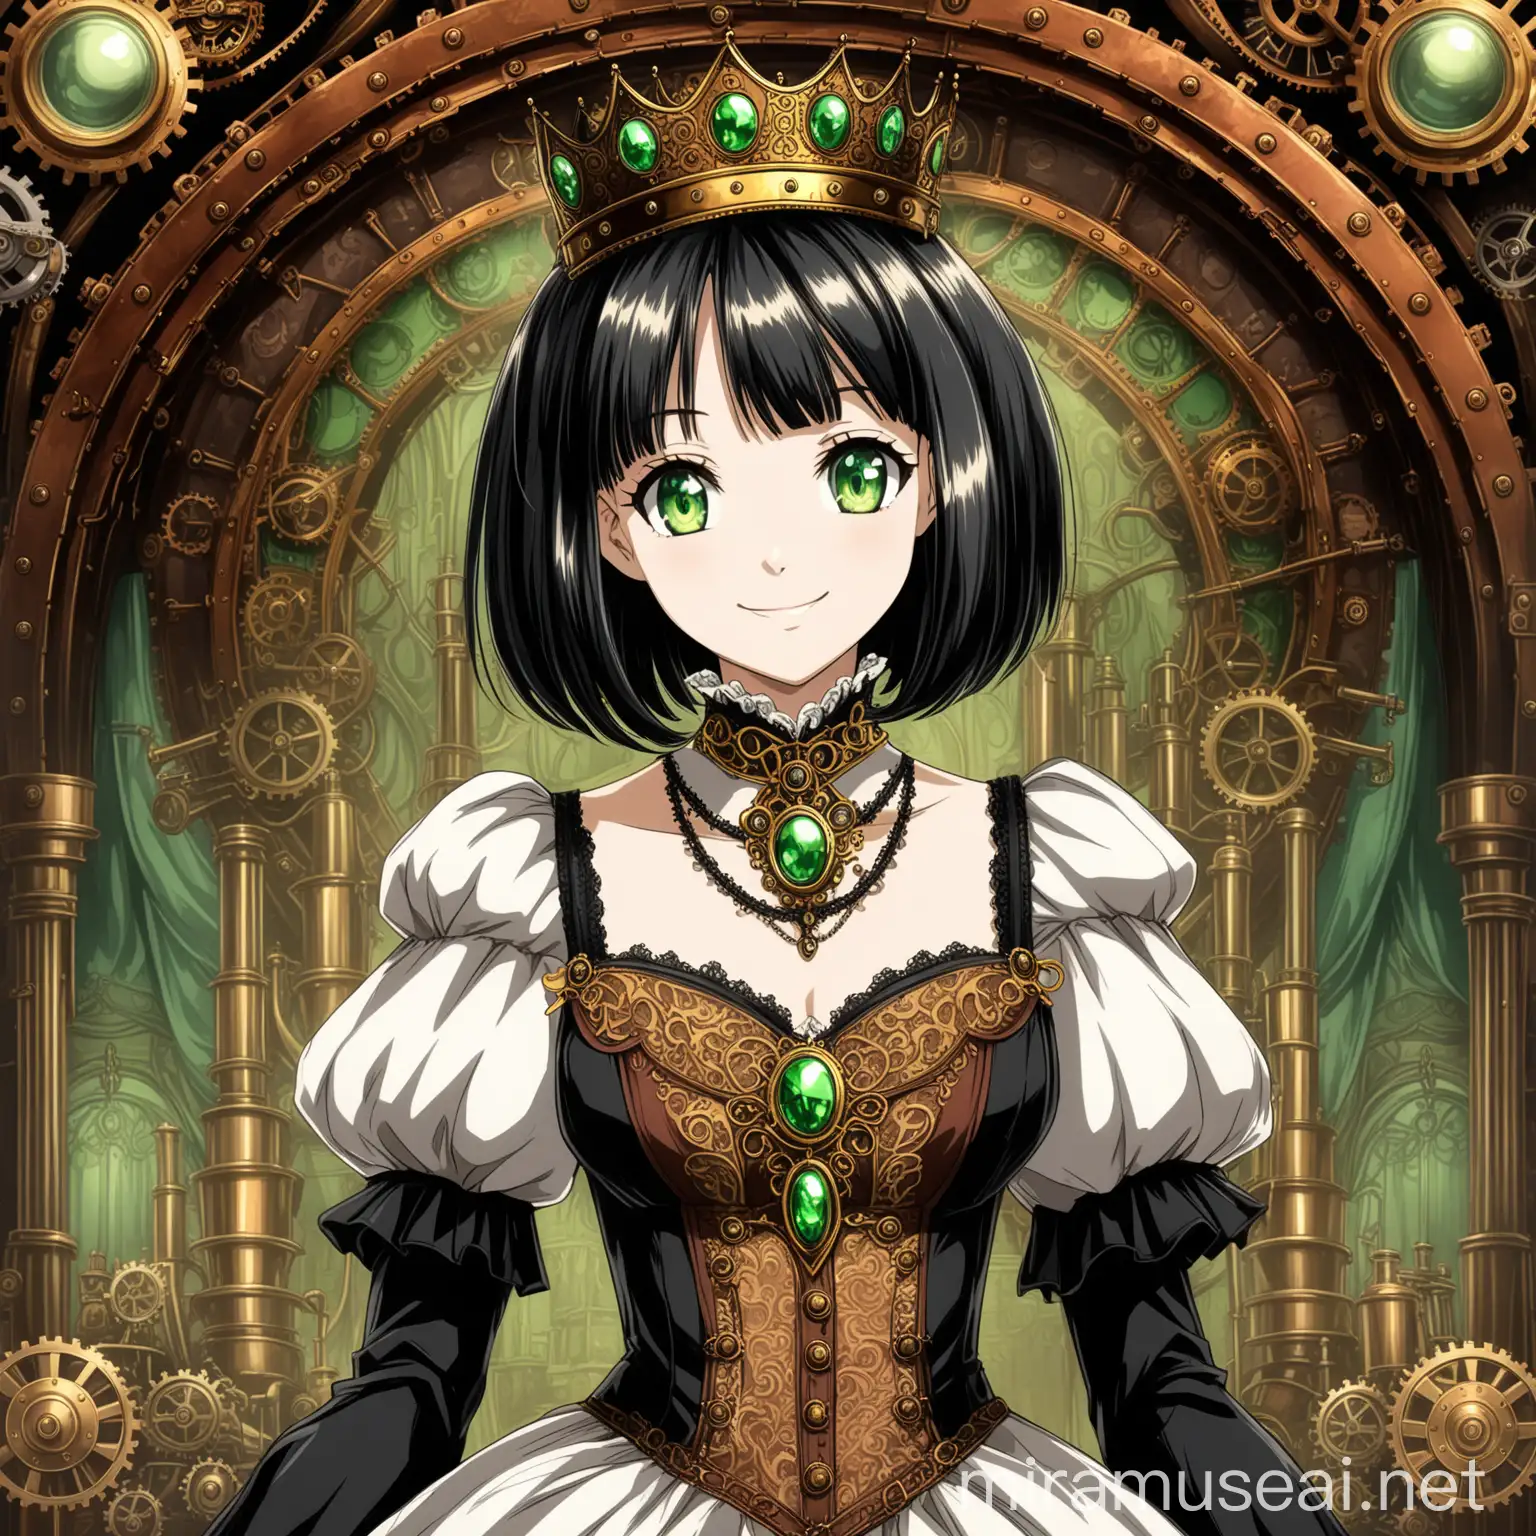 Steampunk Anime Princess with Steel Crown in Victorian Dress